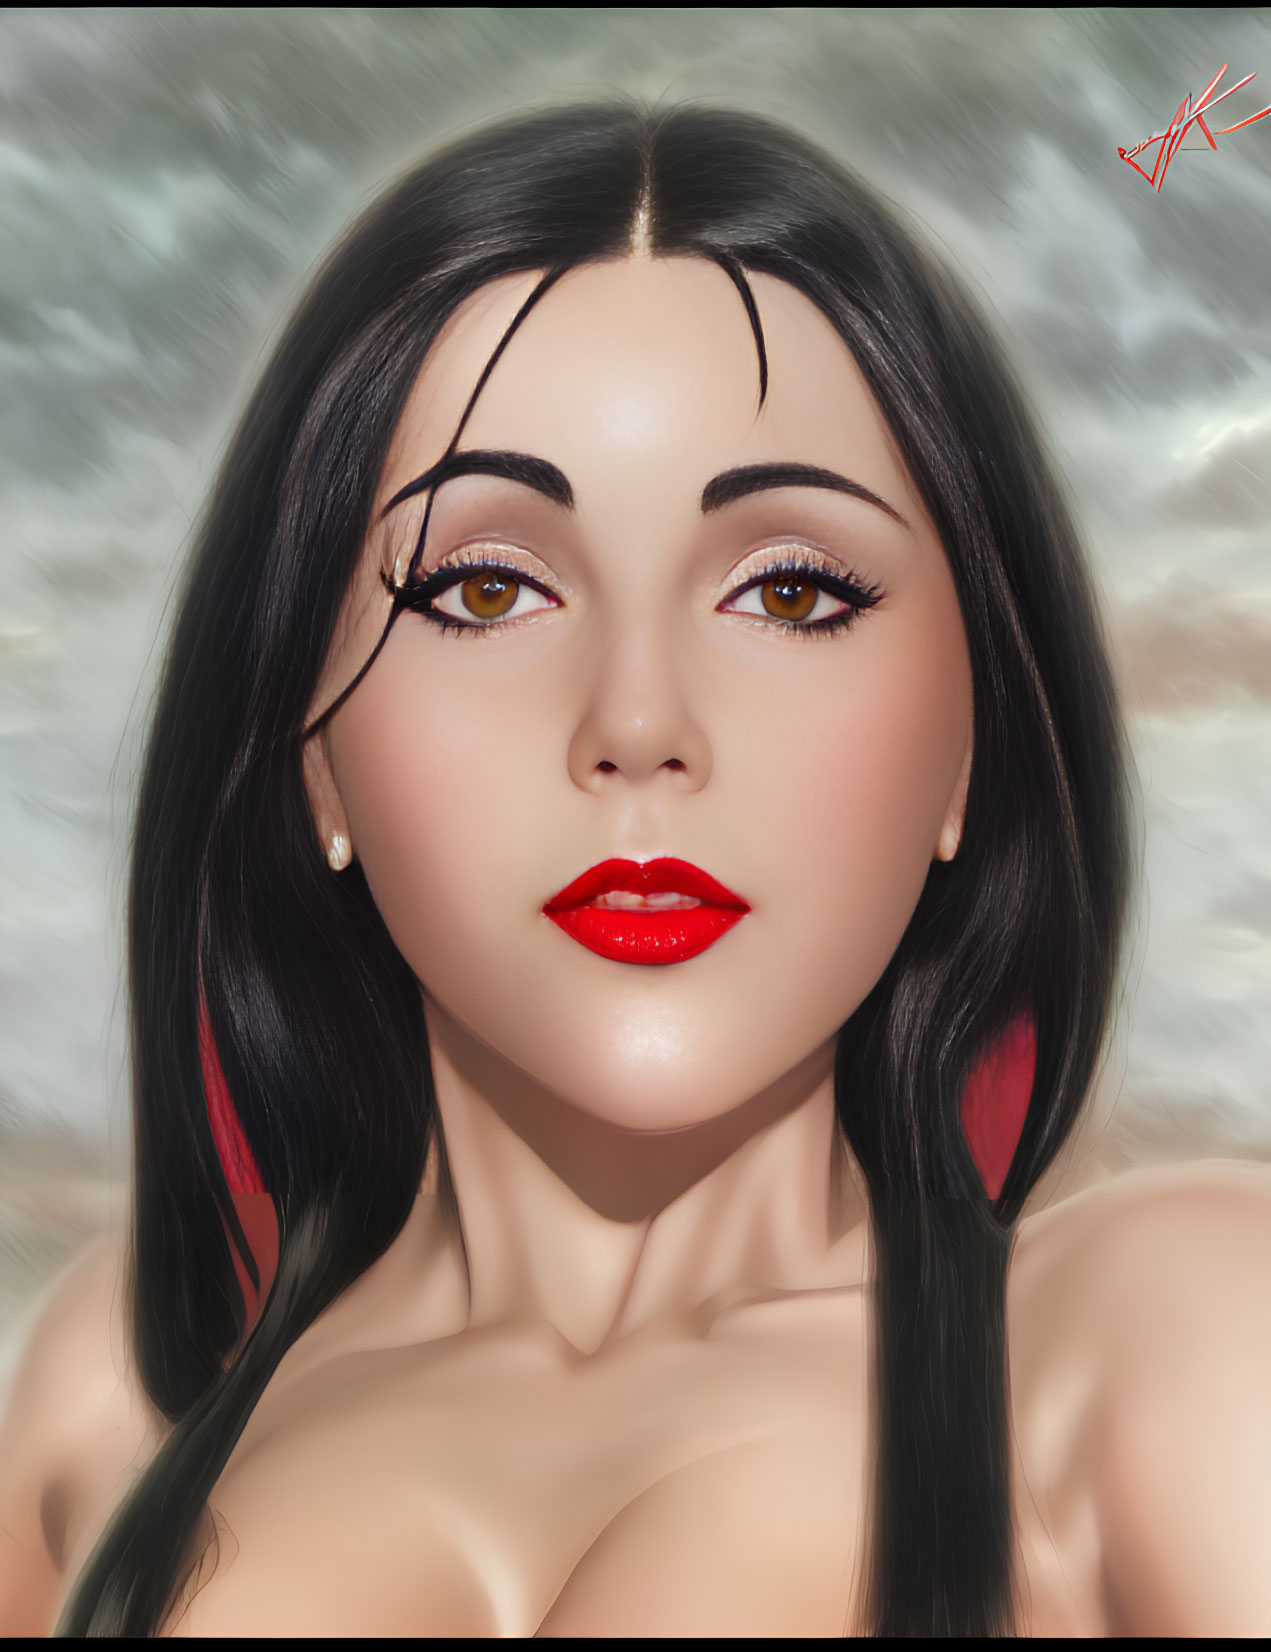 Digital portrait of woman with long black hair and red lipstick against blurry background